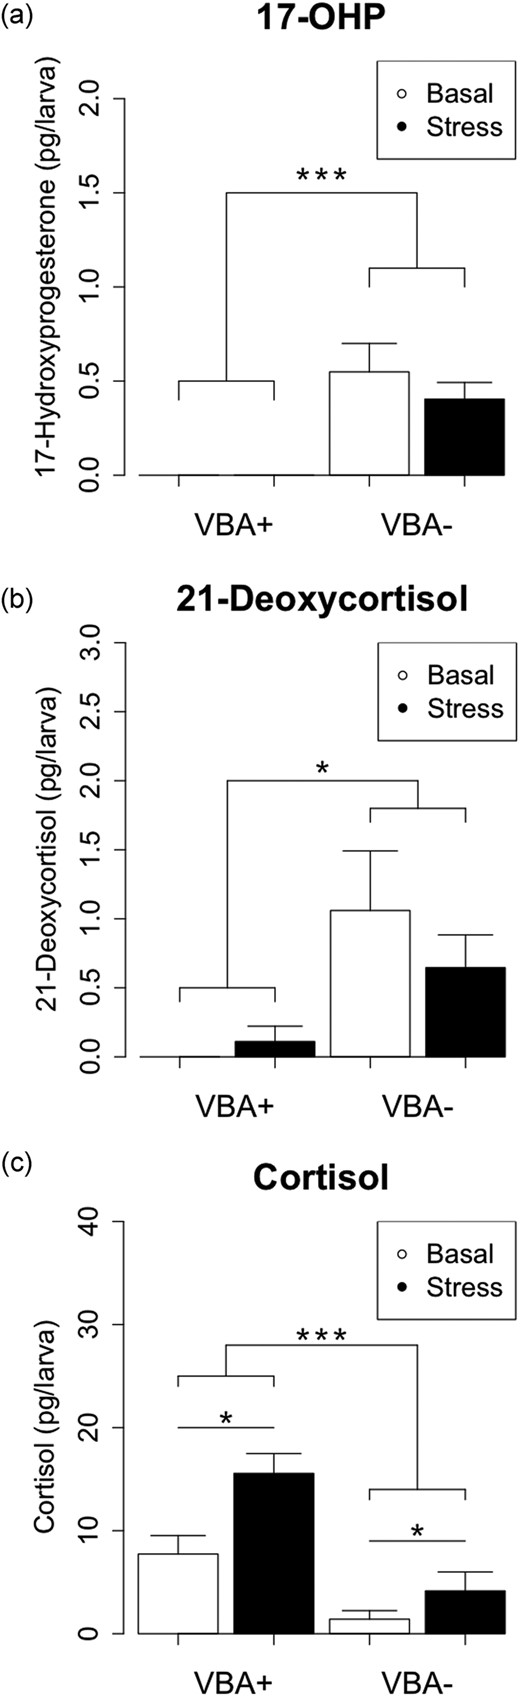 Zebrafish cyp21a2 mutants have impaired steroidogenesis. Measurement of baseline and stress-induced concentrations of steroid hormones in 120-hpf cyp21a2uob2122 VBA+ (wild-type) and VBA− (mutant) larvae by UPLC-MS/MS. (a) 17-OHP concentrations are significantly higher in VBA− (mutant) larvae than in VBA+ (wild-type) larvae, and levels are not significantly altered by stress treatment (two-way ANOVA: genotype F = 29.71, df = 1,8, ***P = 0.0006; stress F = 0.68, df = 1,8, P = 0.433; genotype/stress F = 0.68, df = 1,8, P = 0.433). n = 3 each. (b) 21-Deoxycortisol concentration is significantly higher in VBA− (mutant) larvae than in VBA+ (wild-type) larvae and is not significantly altered by stress treatment (two-way ANOVA: genotype F = 9.97, df = 1,8, *P = 0.013; stress F = 0.36, df = 1,8, P = 0.565; genotype/stress F = 1.08, df = 1,8, P = 0.329). n = 3 each. (c) Cortisol concentration is significantly lower in VBA− (mutant) larvae than in VBA+ (wild-type) larvae, and levels are significantly increased by stress treatment (ANOVA: genotype F = 28.63, df = 1,8, ***P = 0.0007; stress F = 10.19, df = 1,8, *P = 0.013; genotype/stress F = 2.35, df = 1,8, P = 0.163). n = 3 each.